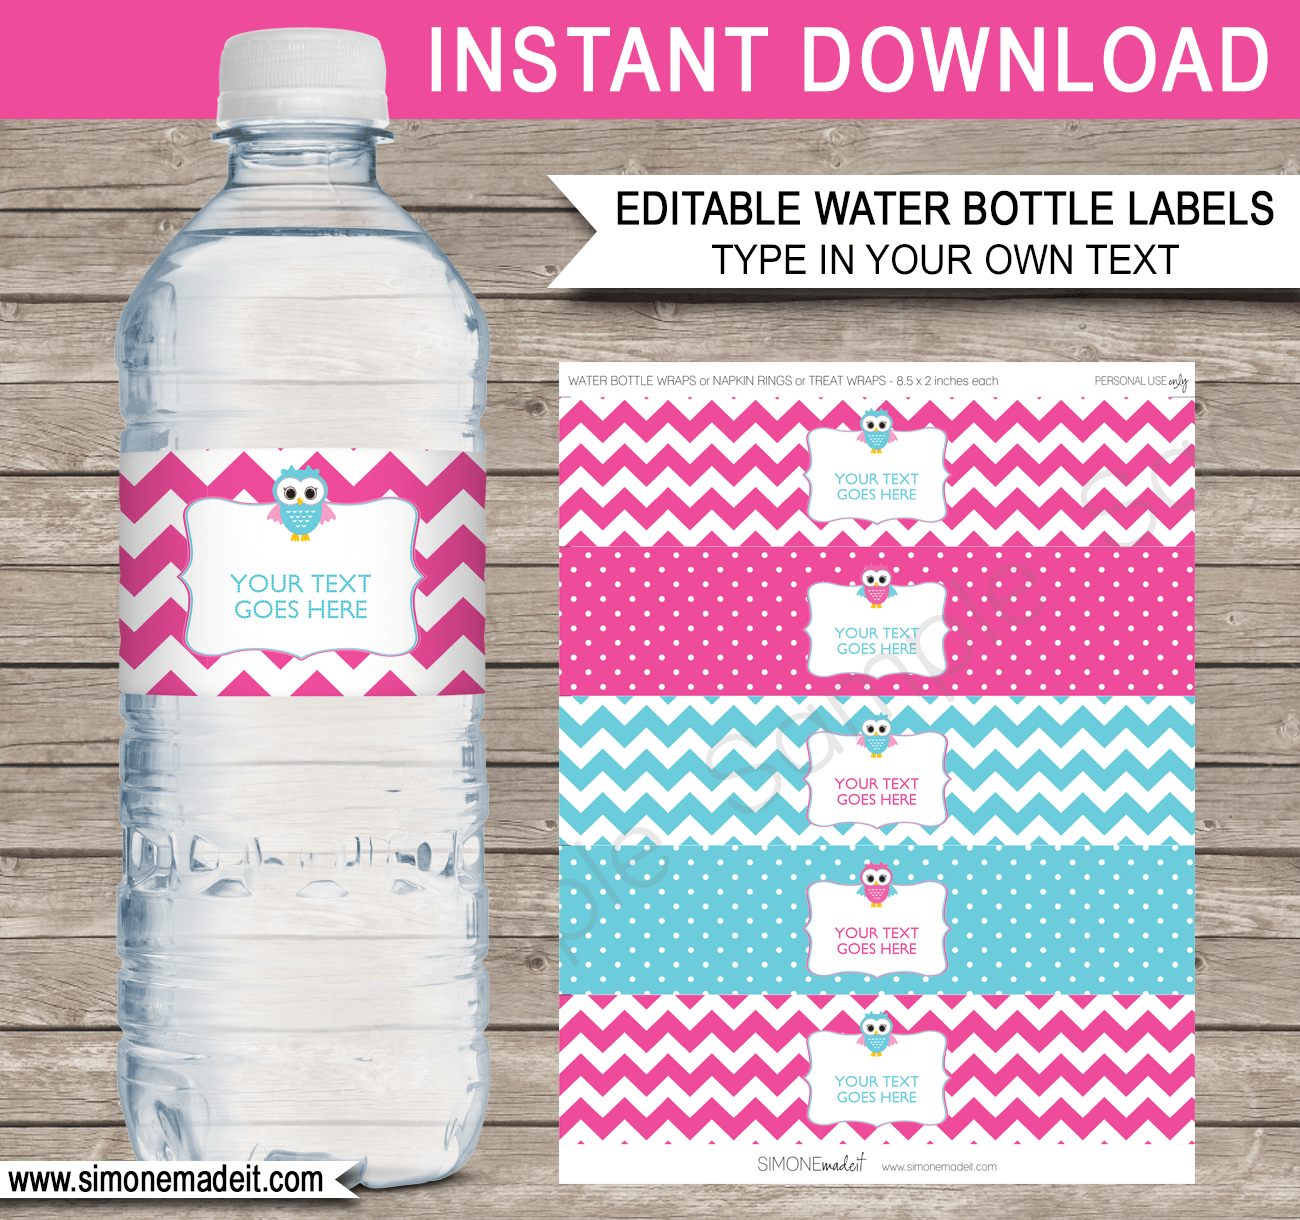 Pink Printable Owl Party Water Bottle Labels | Baby Shower or Birthday Party Theme | Editable DIY Template | $3.00 INSTANT DOWNLOAD via SIMONEmadeit.com